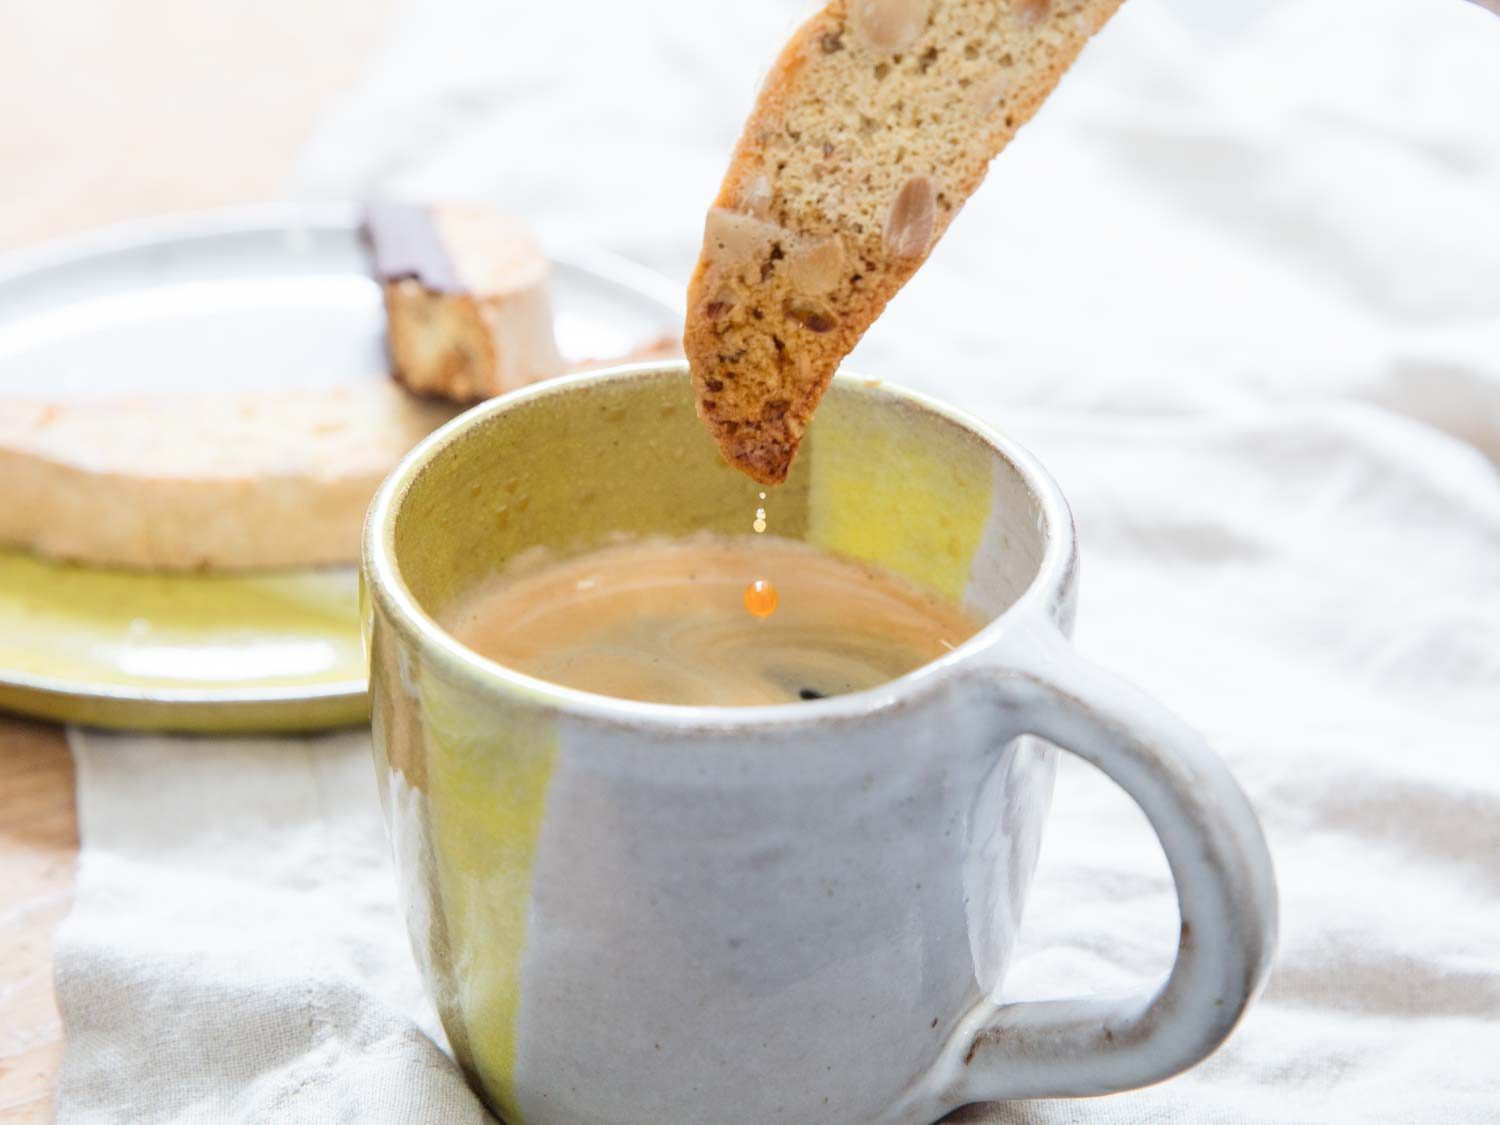 A hot cup of coffee with biscotti.